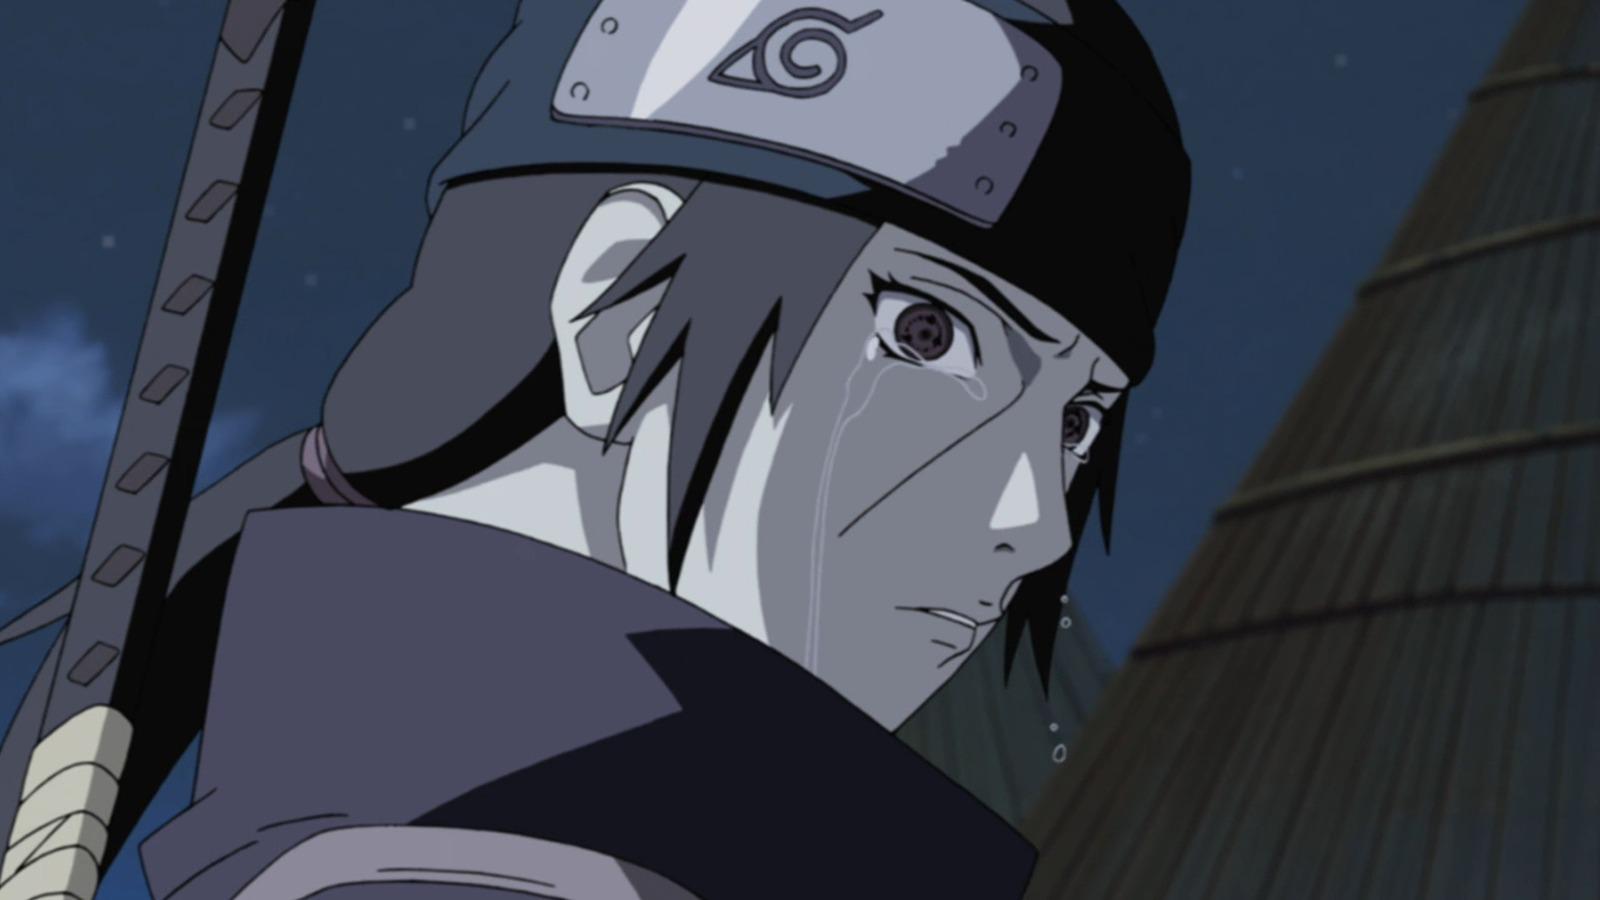 An image of Itachi Uchiha crying after killing his clan in Naruto